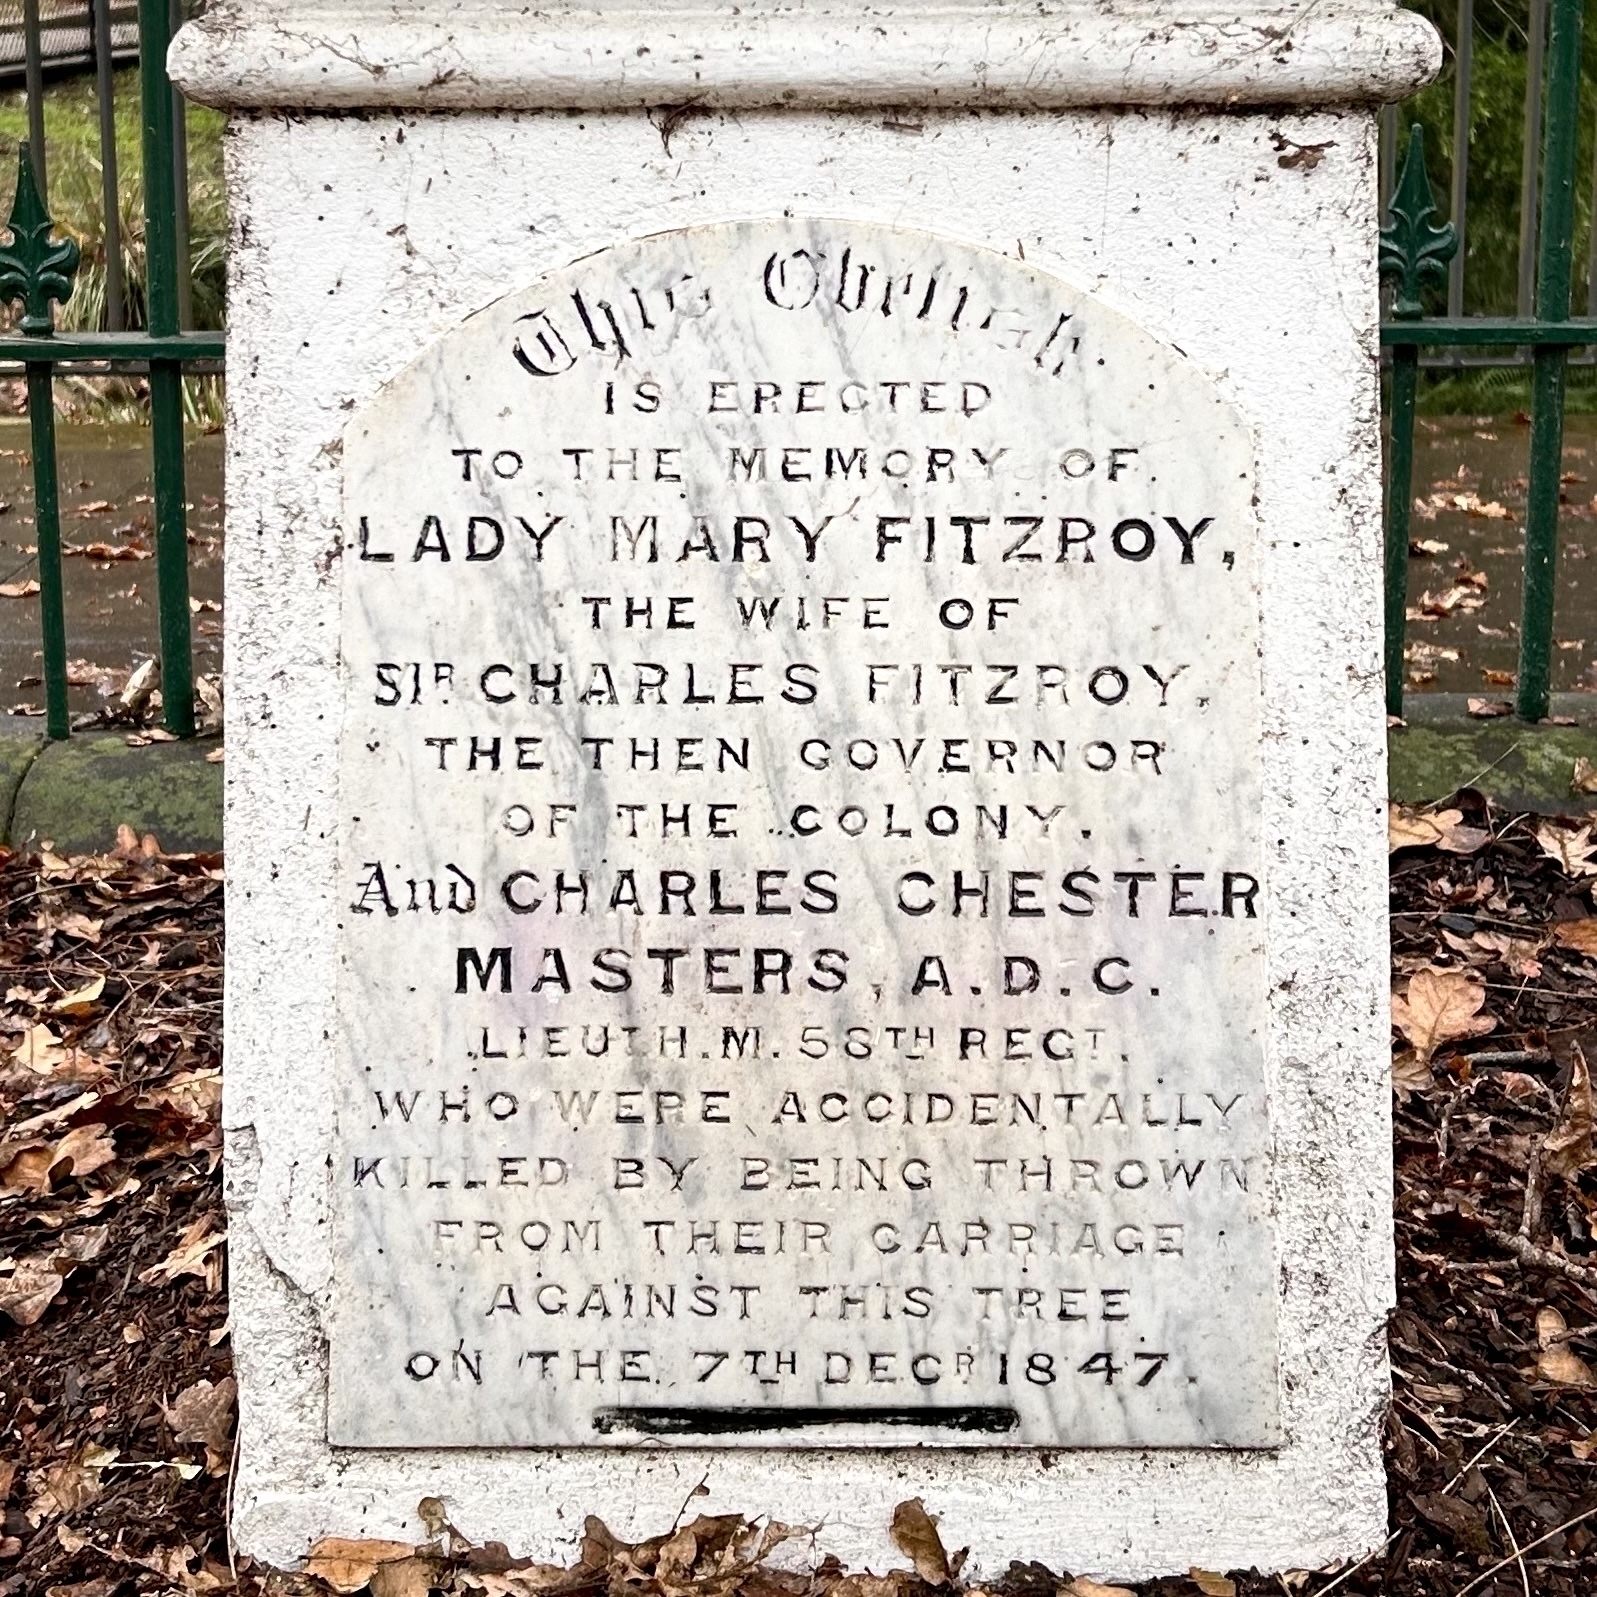 A plaque at the bottom of an obelisk. It says "THIS OBELISK IS ERECTED TO THE MEMORY OF&10;LADY MARY FITZROY, THE WIFE OFSIR CHARLES FITZROY&10;THE THEN GOVERNOR OF THE COLONY&10;AND CHARLES CHESTER MASTERS, A.D.C.&10;WHO WERE ACCIDENTALLY KILLED BYBEING THROWN FROM THEIR CARRIAGE AGAINST THIS TREE ON THE 7TH DEC I847. &10;&10;Not pictured: the tree. 